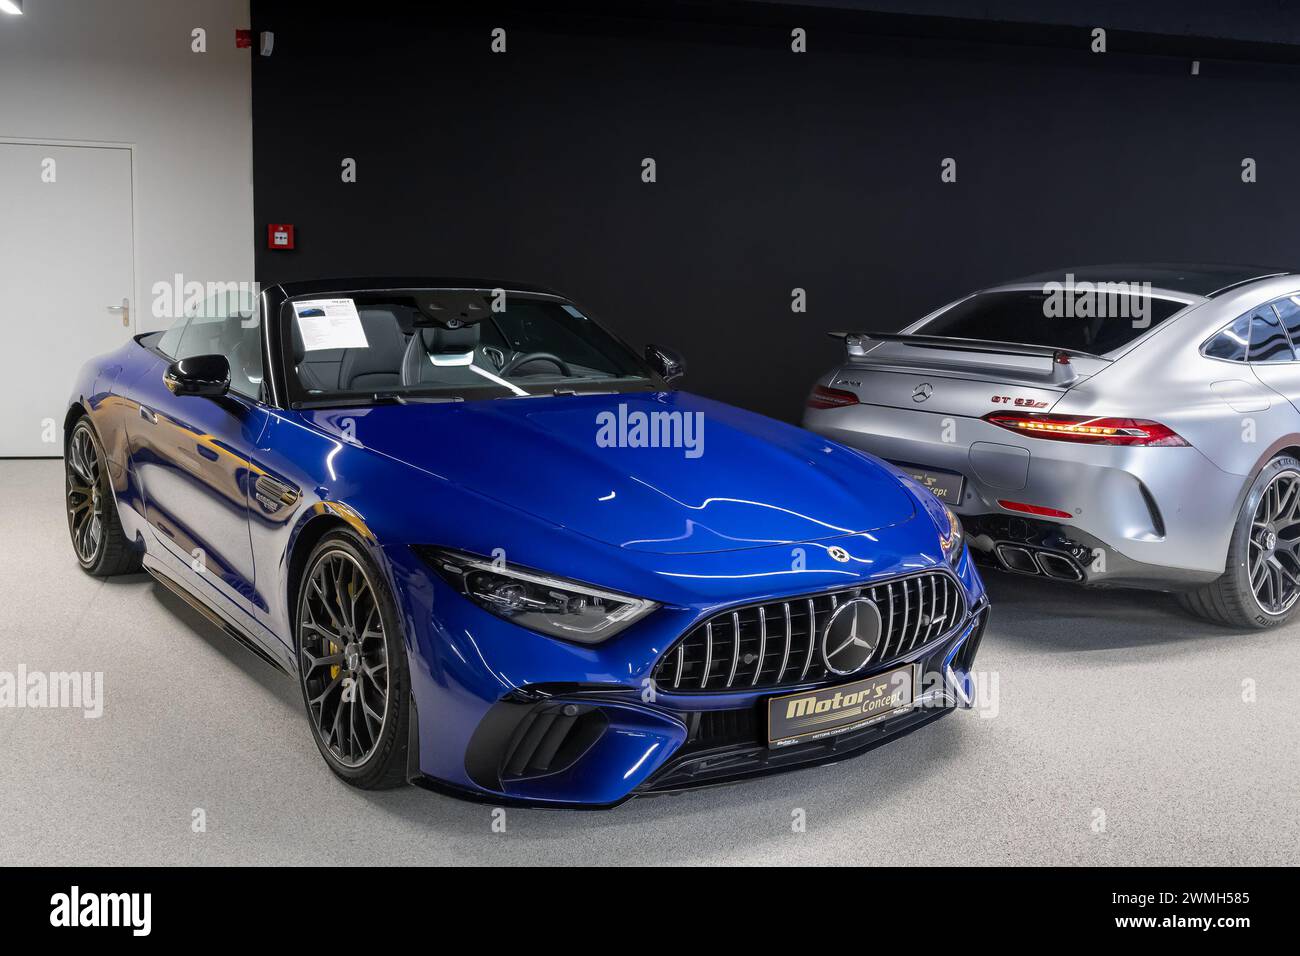 Luxembourg City, Luxembourg - Focus on a blue Mercedes-AMG SL 63 in a showroom. Stock Photo